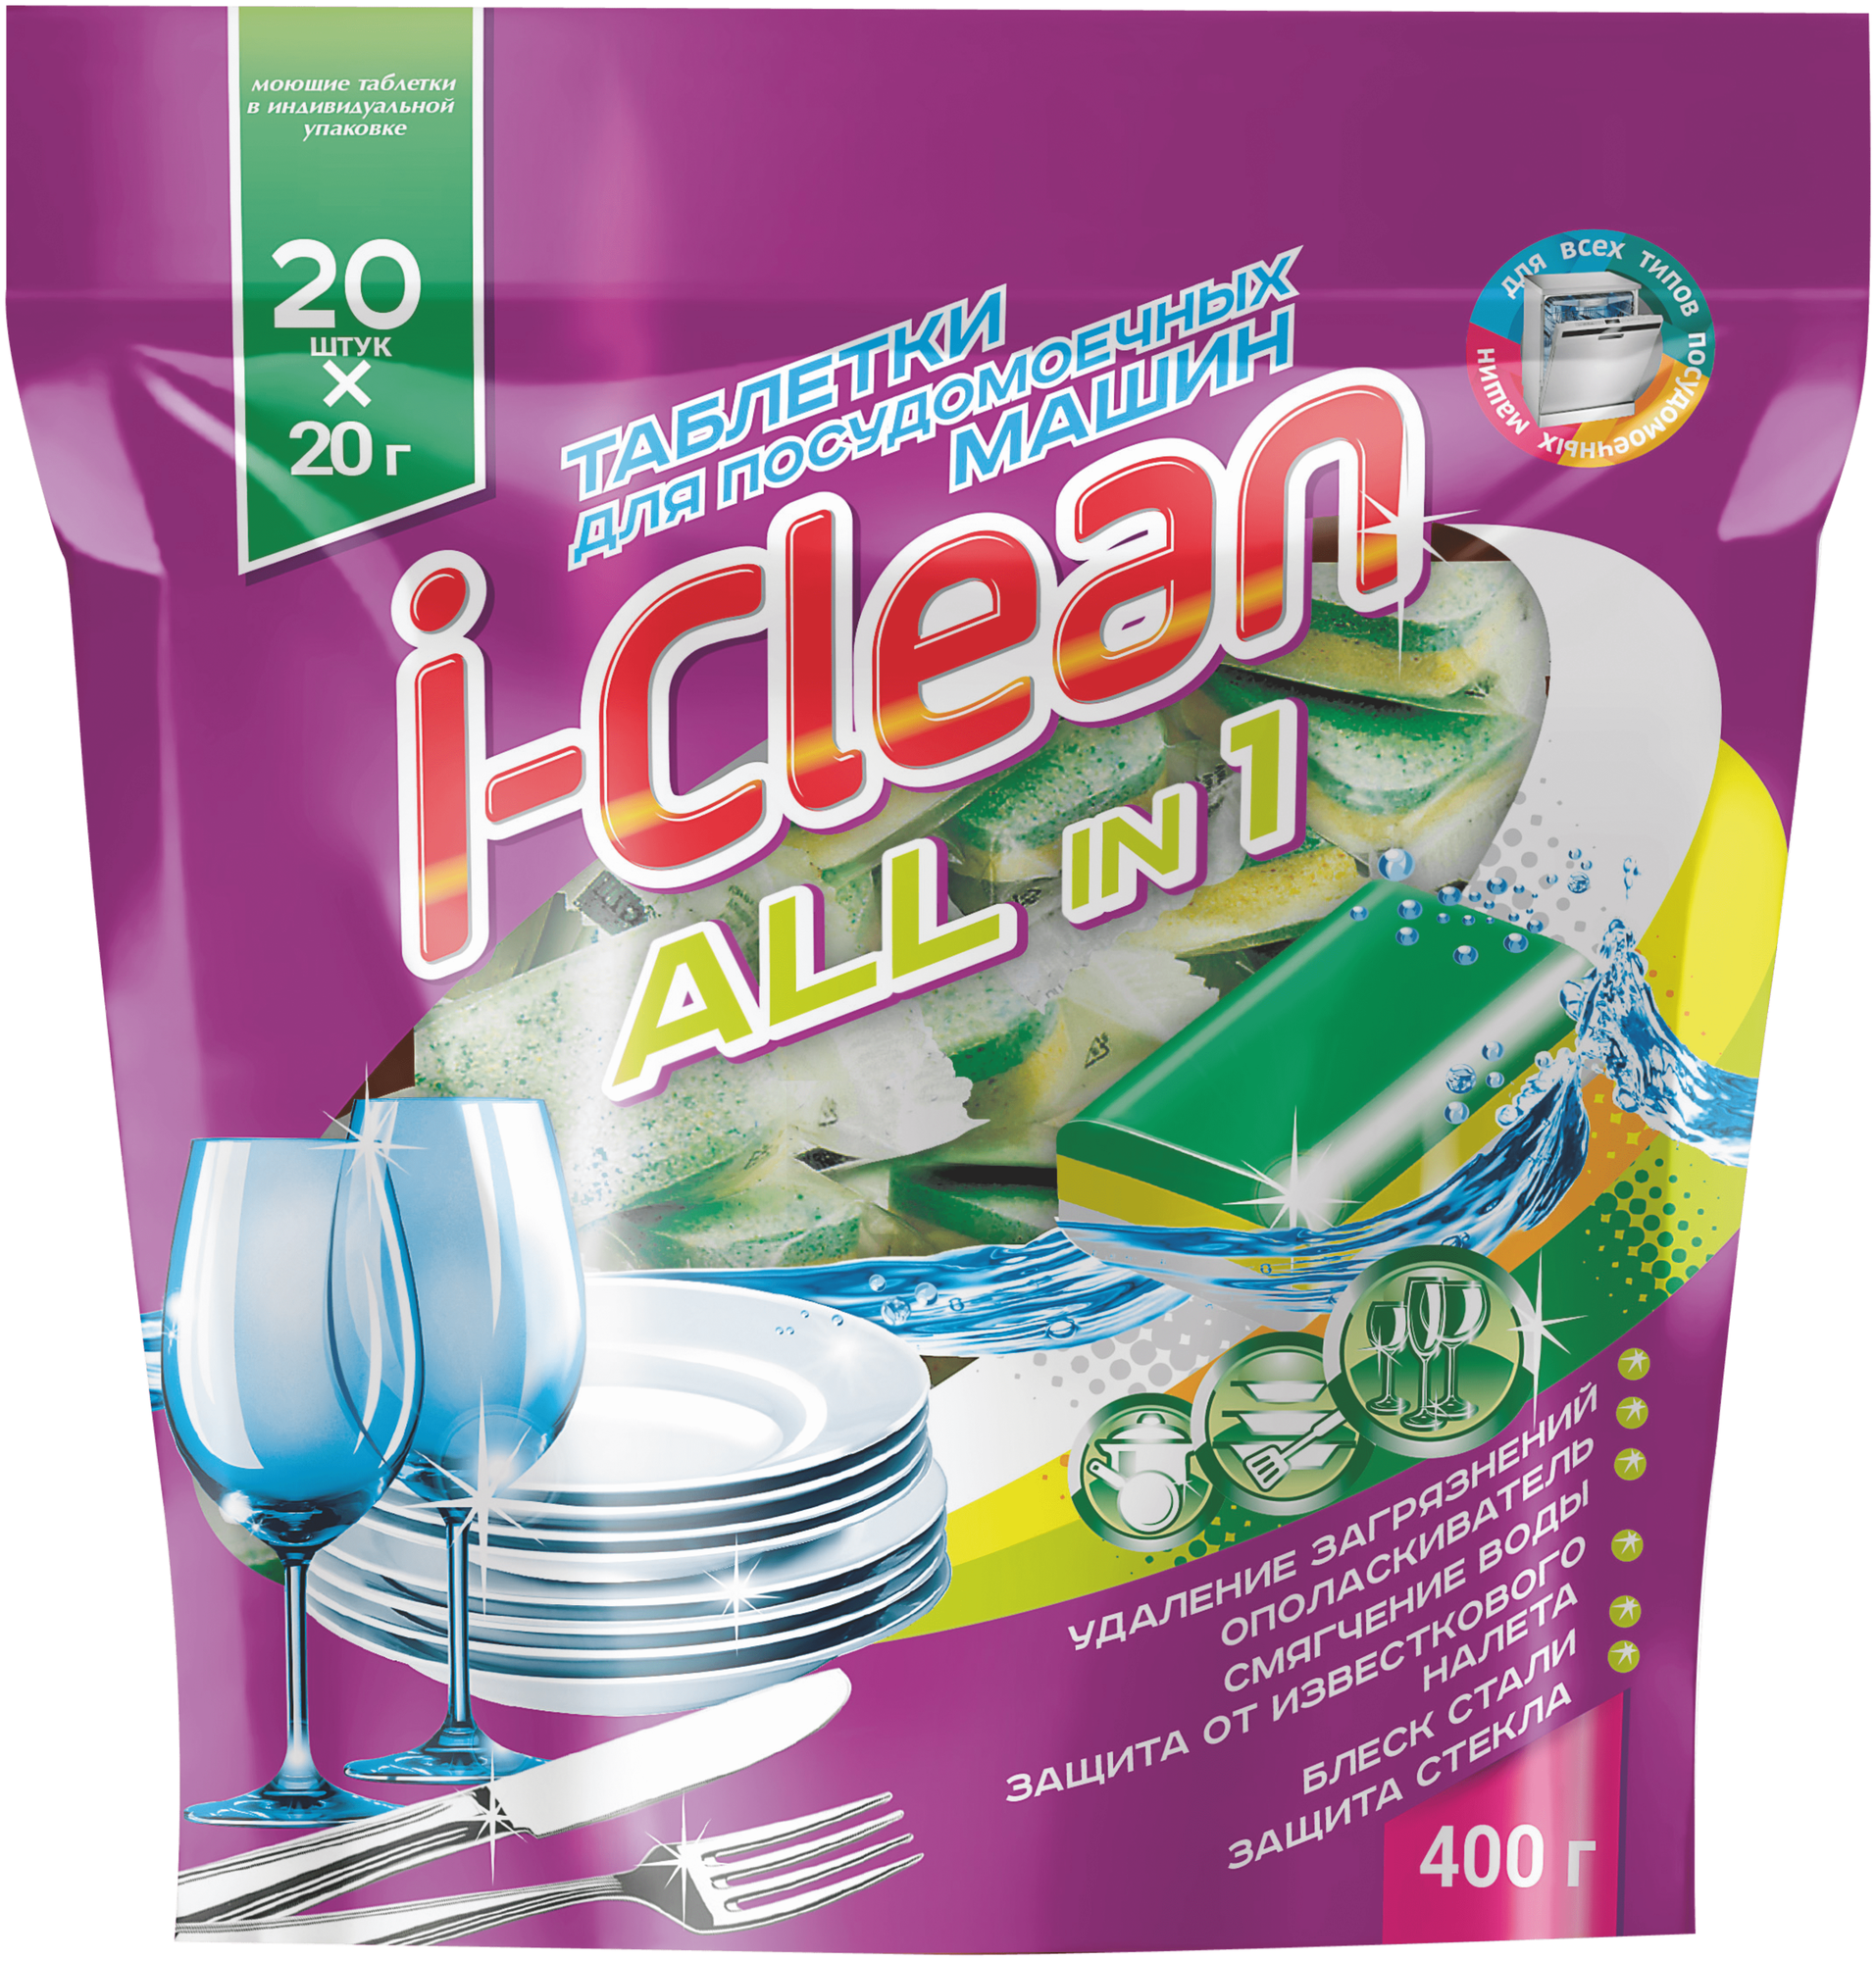 I-Clean     All in 1 20